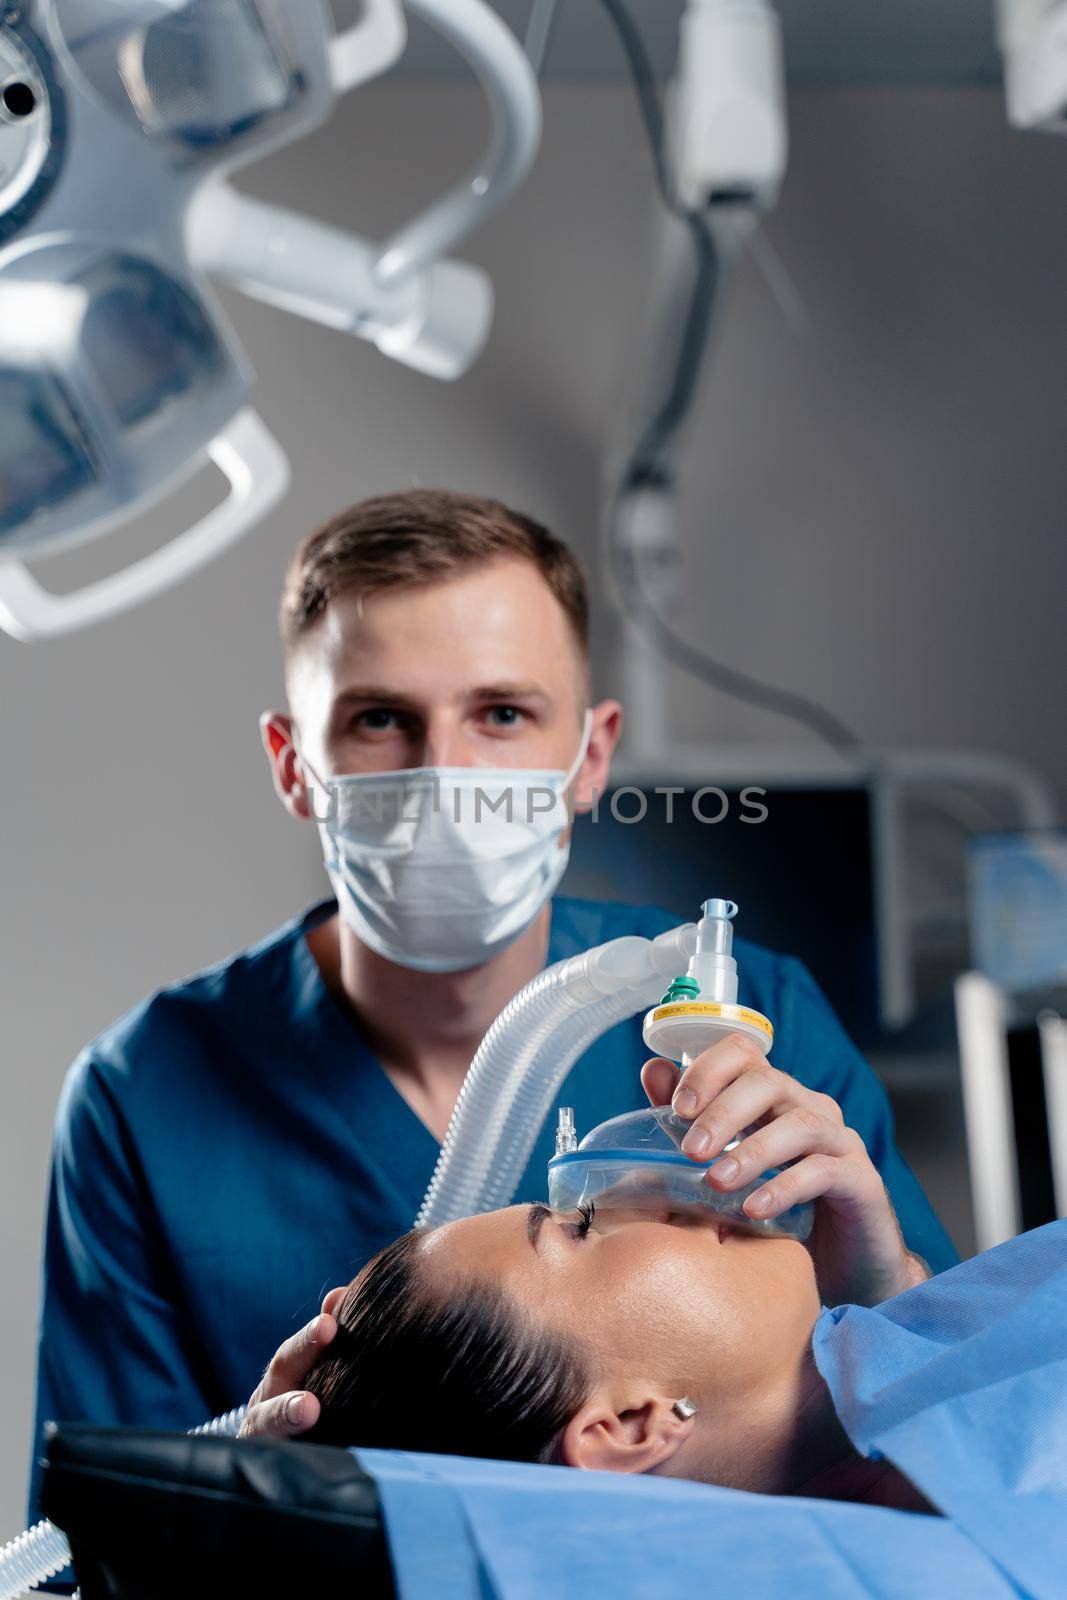 Anesthesiologist making ingalation anesthesia for patient. Doctor puts a mask on the patient before starting operation.